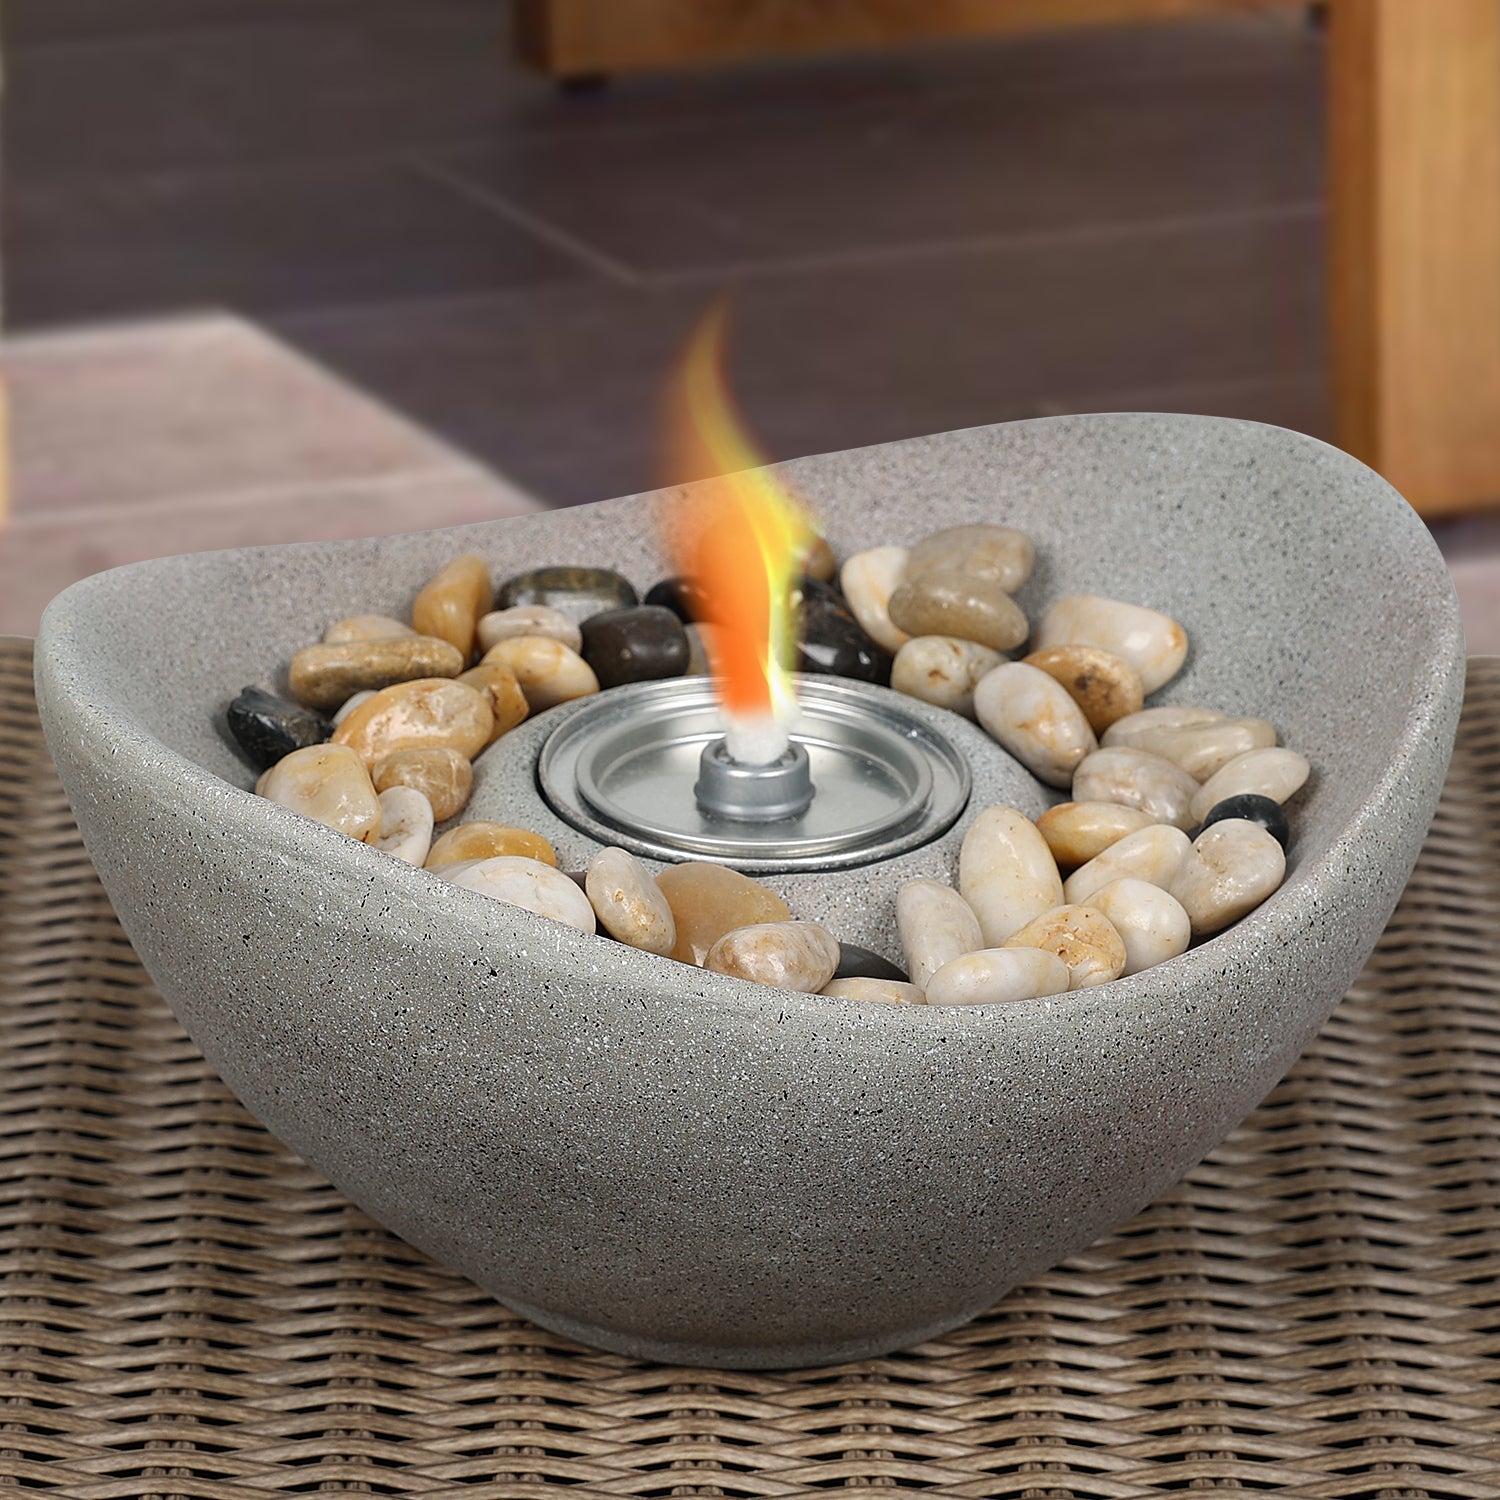 Portable Concrete Fire Pit - Indoor/Outdoor Tabletop Fireplace for